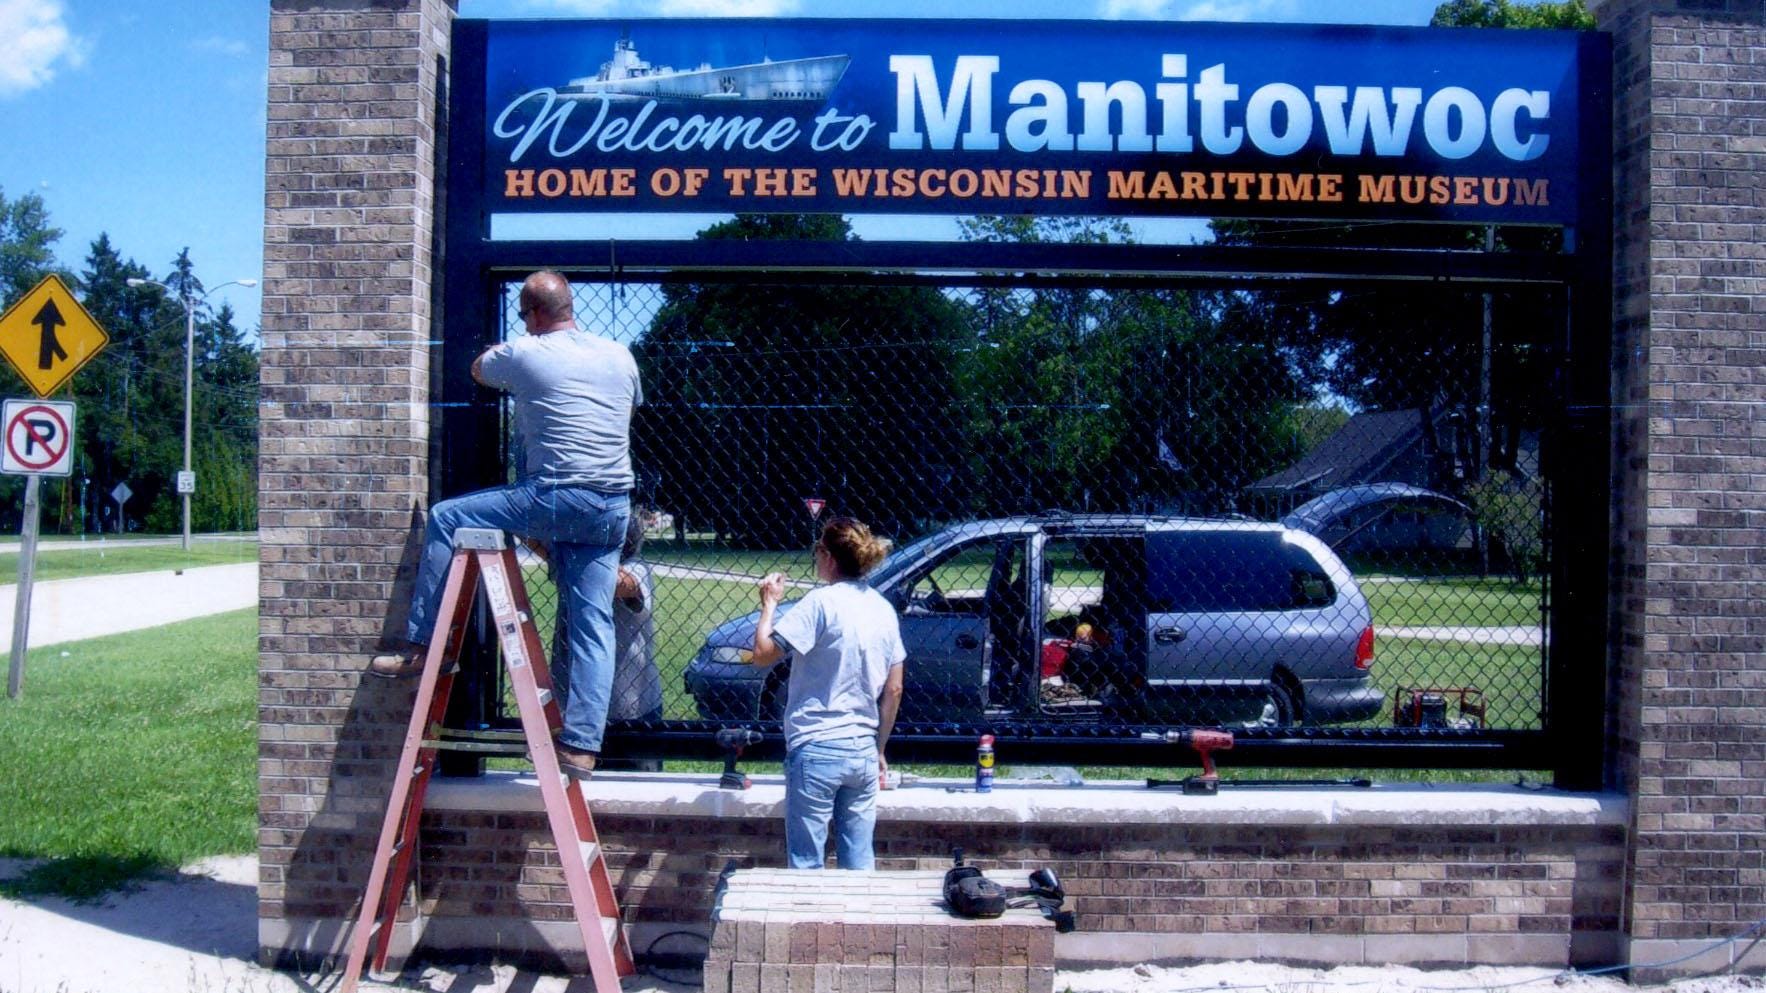 EF Becker and Sons placed the final piece on the “Welcome to Manitowoc” sign on Waldo Avenue. Dean Becker, on the steps, Kim Becker, standing, Tim Becker, behind the sign, and Greg Becker equipping and installing a black chain link panel and emblazoned with the organization's symbols.